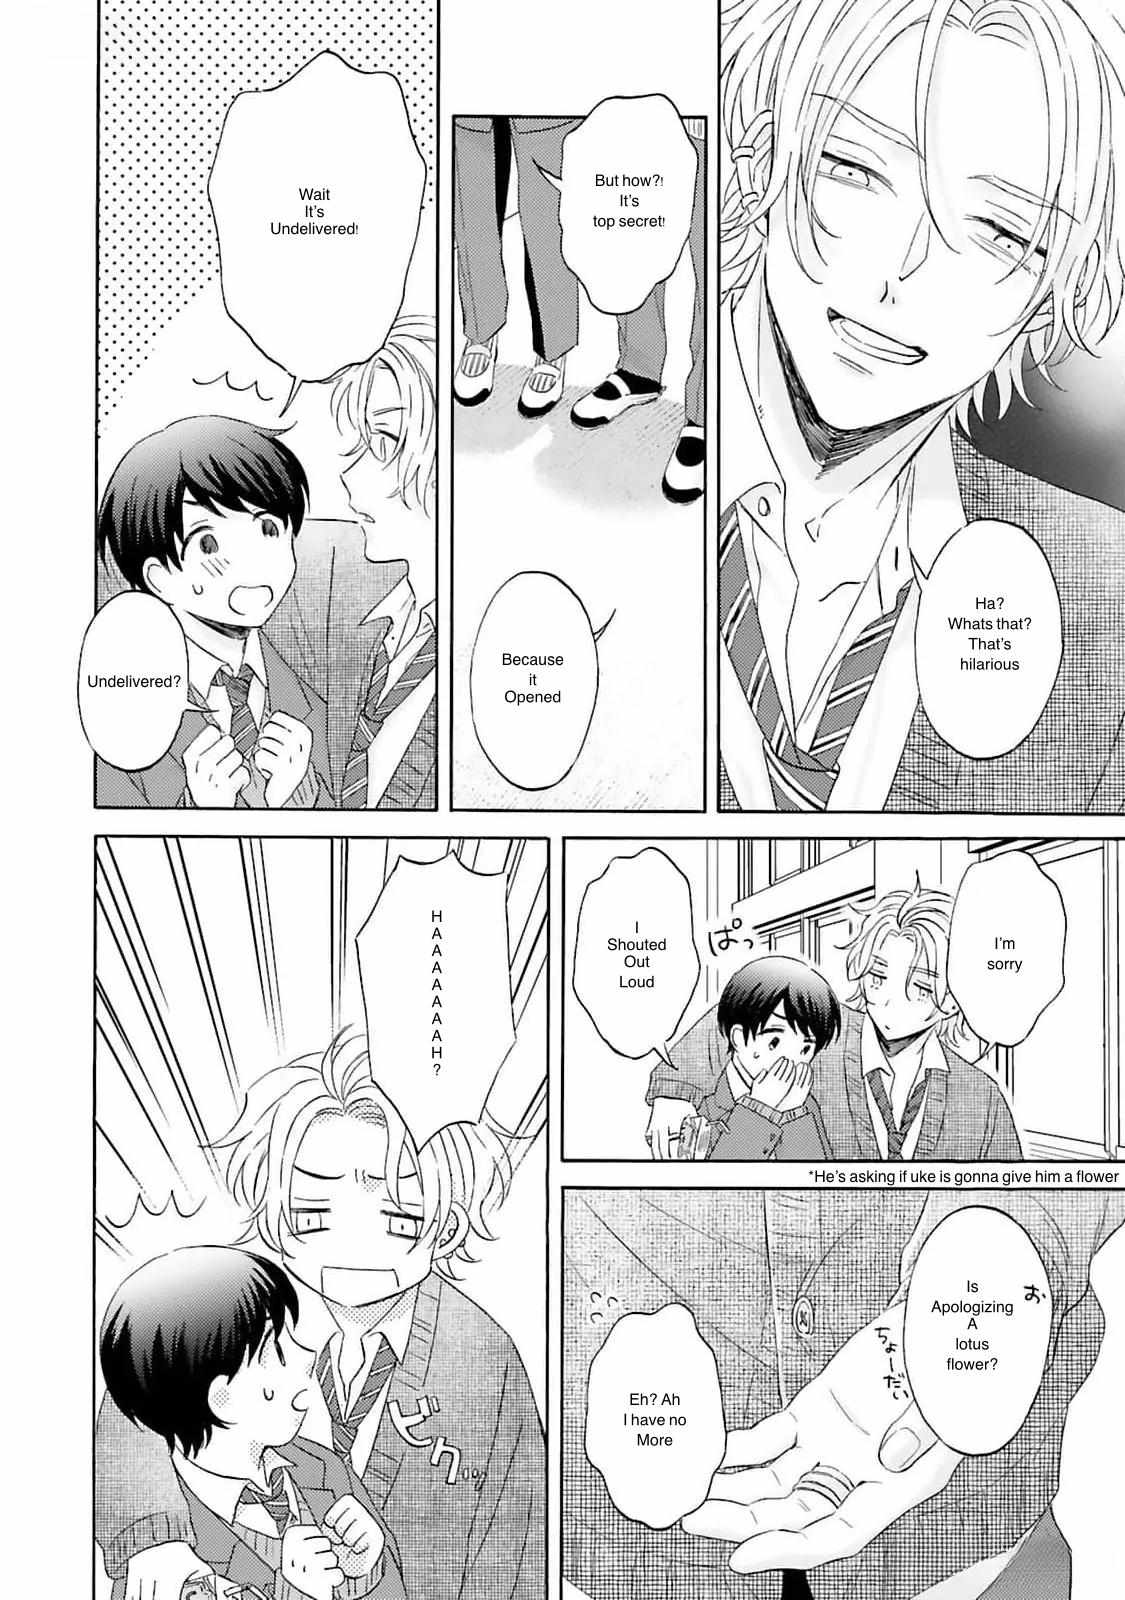 My Cutie Pie -An Ordinary Boy And His Gorgeous Childhood Friend- 〘Official〙 - 4 page 26-c3503ea9